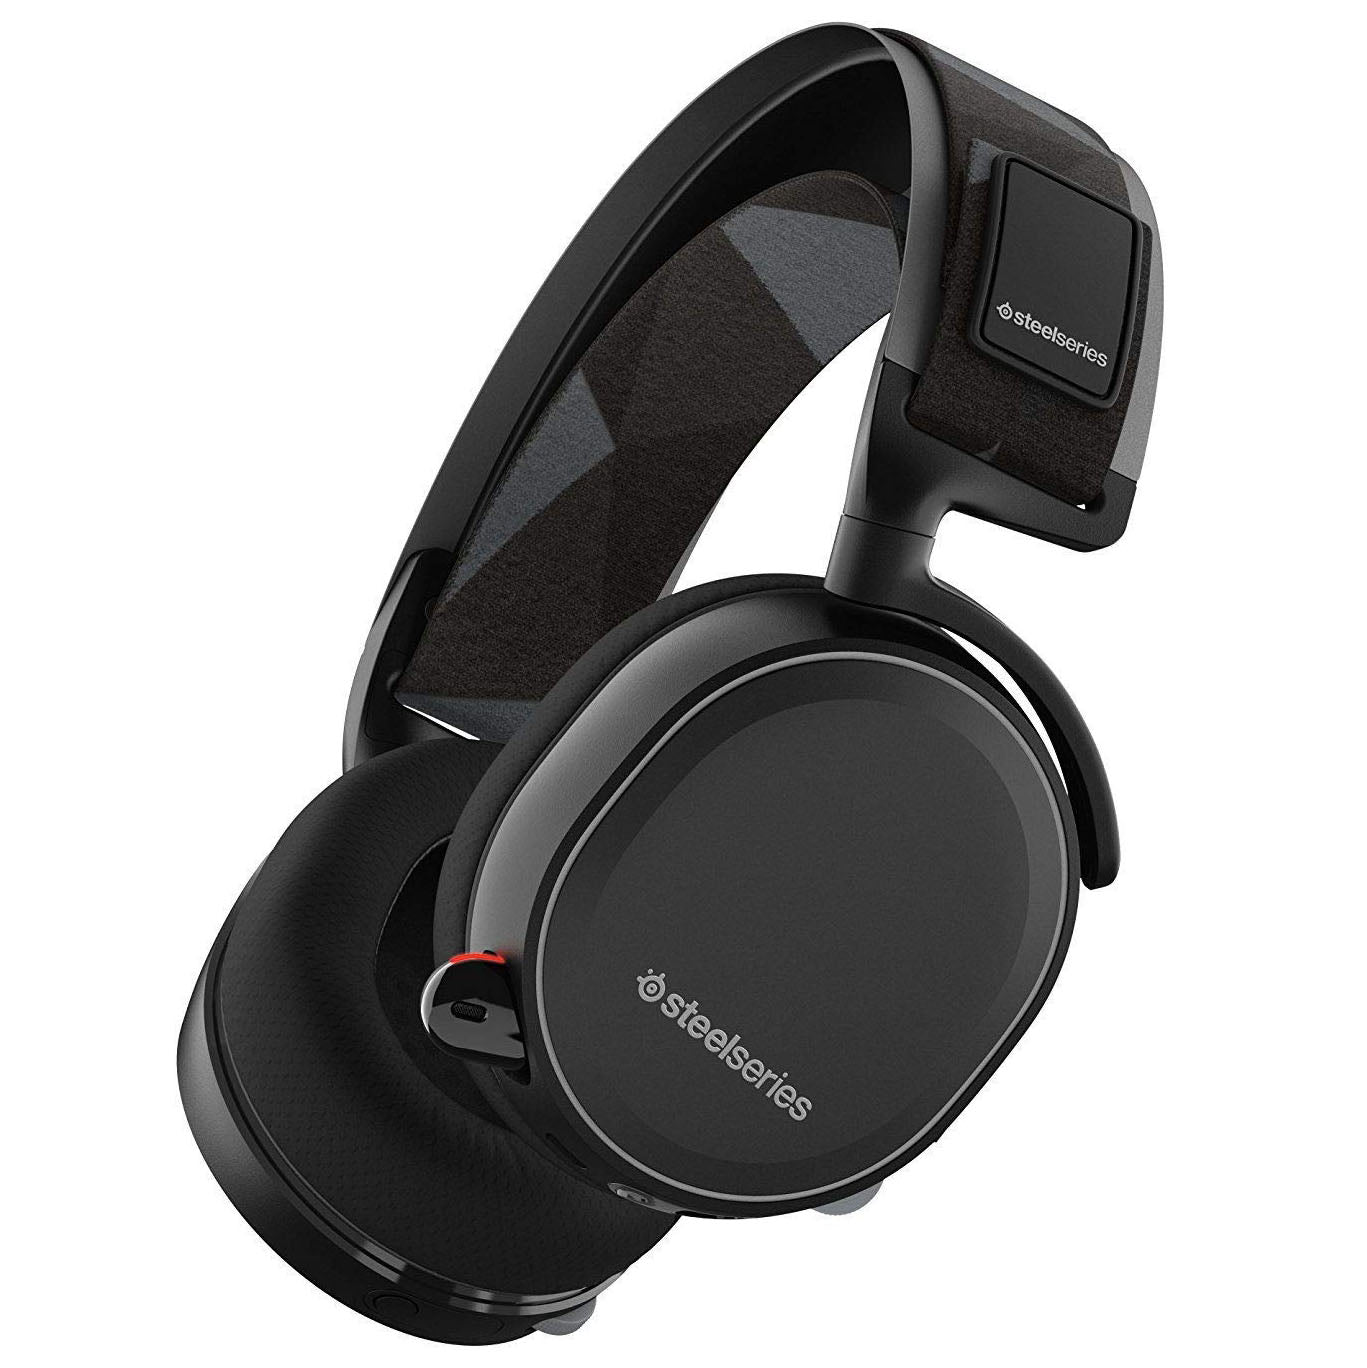 SteelSeries Arctis 7 Wireless Gaming Over-ear Headset with 7.1 Surround - Black (Certified Refurbished)